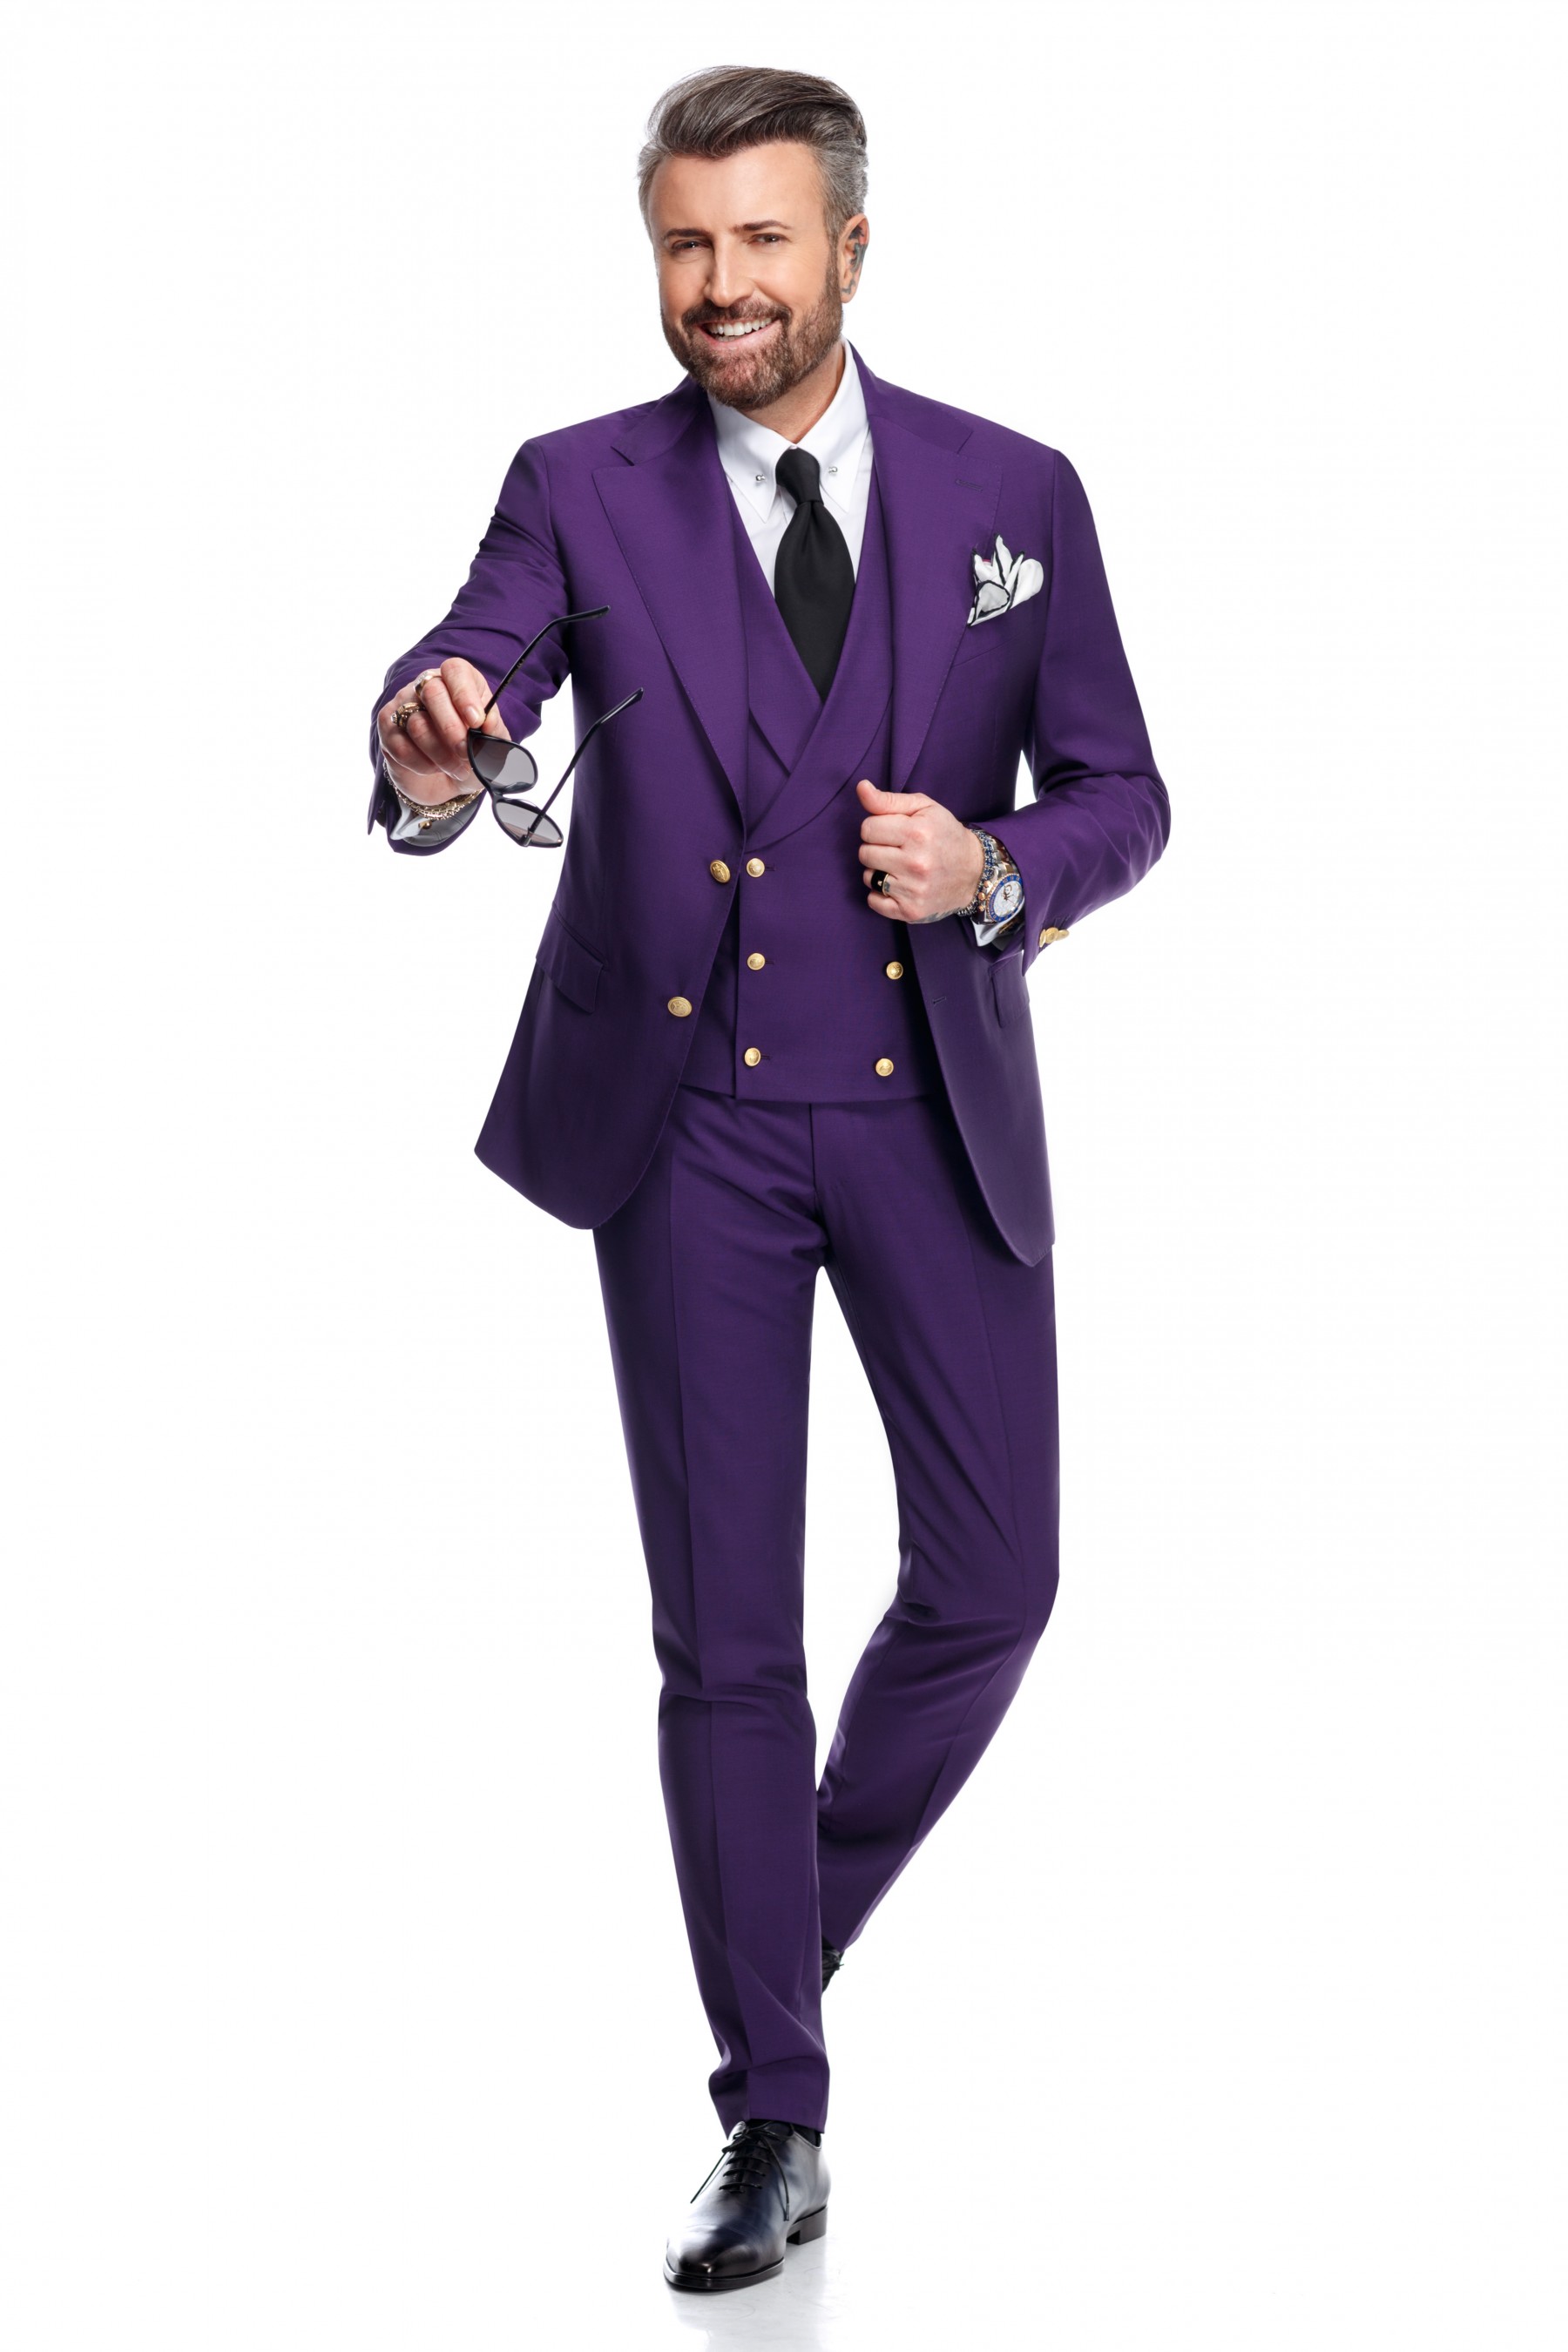 6 types of suits for the New Year's Eve party | Shopping in Romania